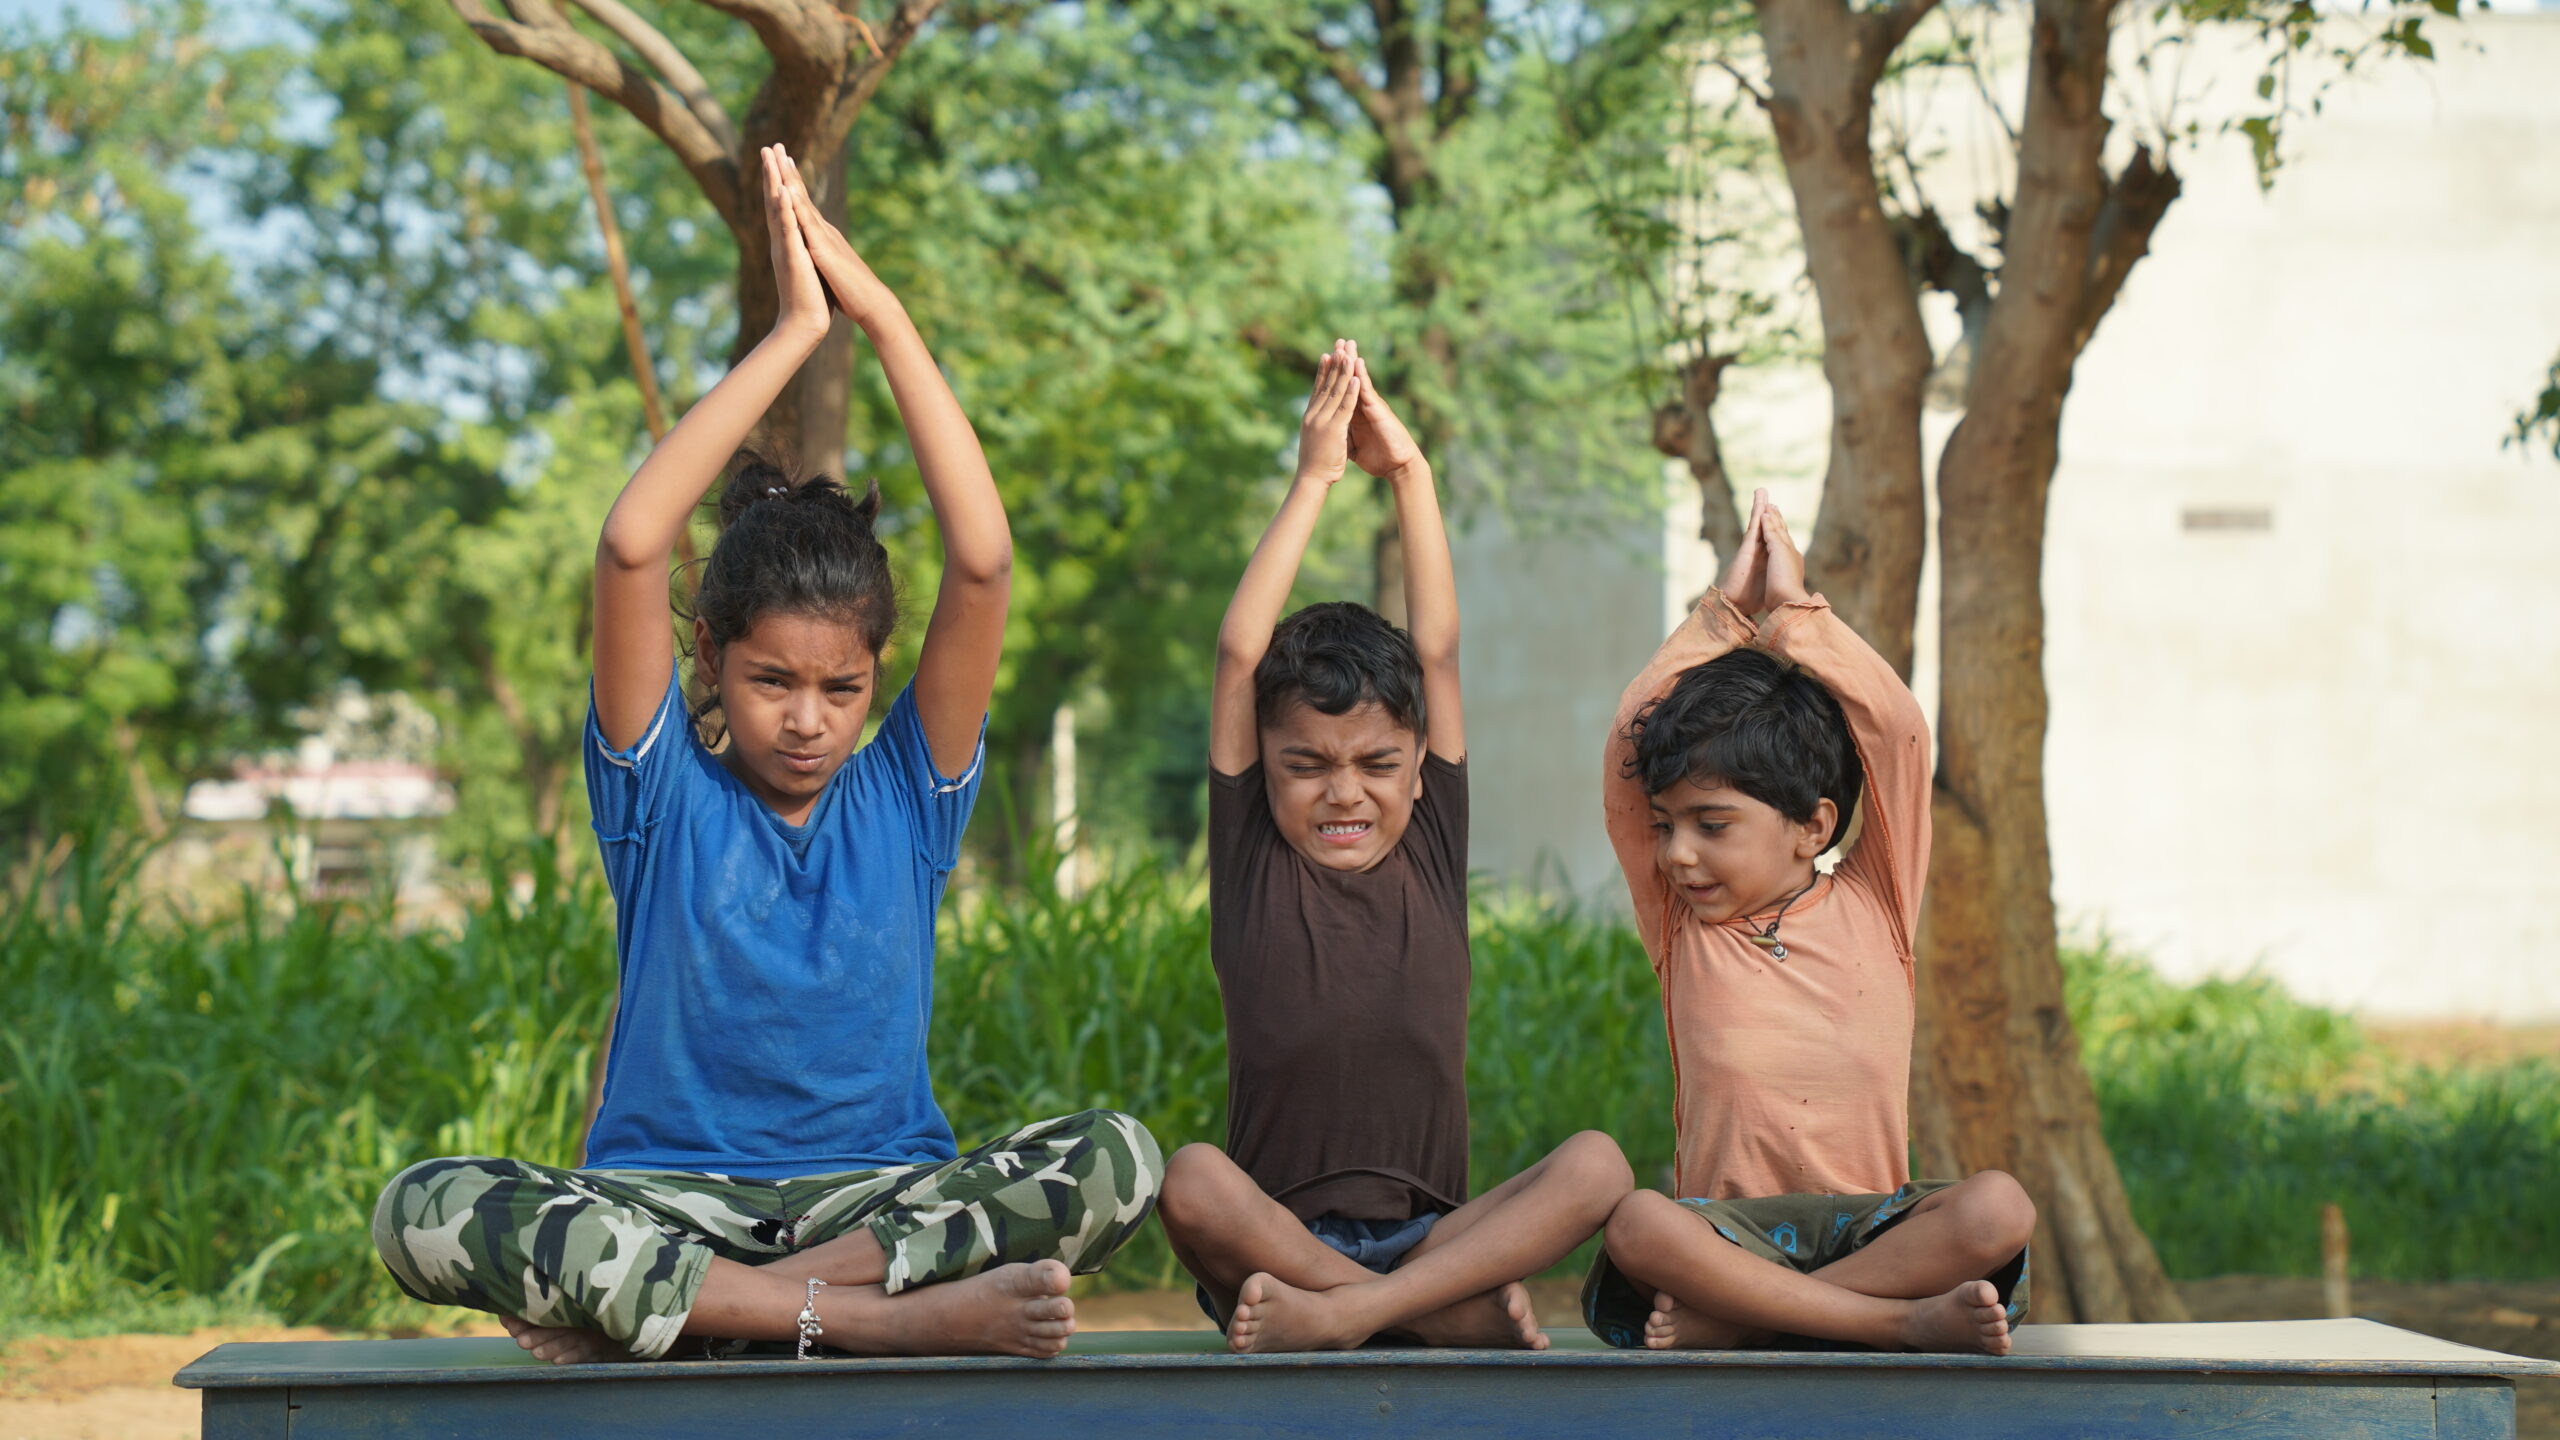 Children in blue and orange uniform participating in yoga practice in an open area.